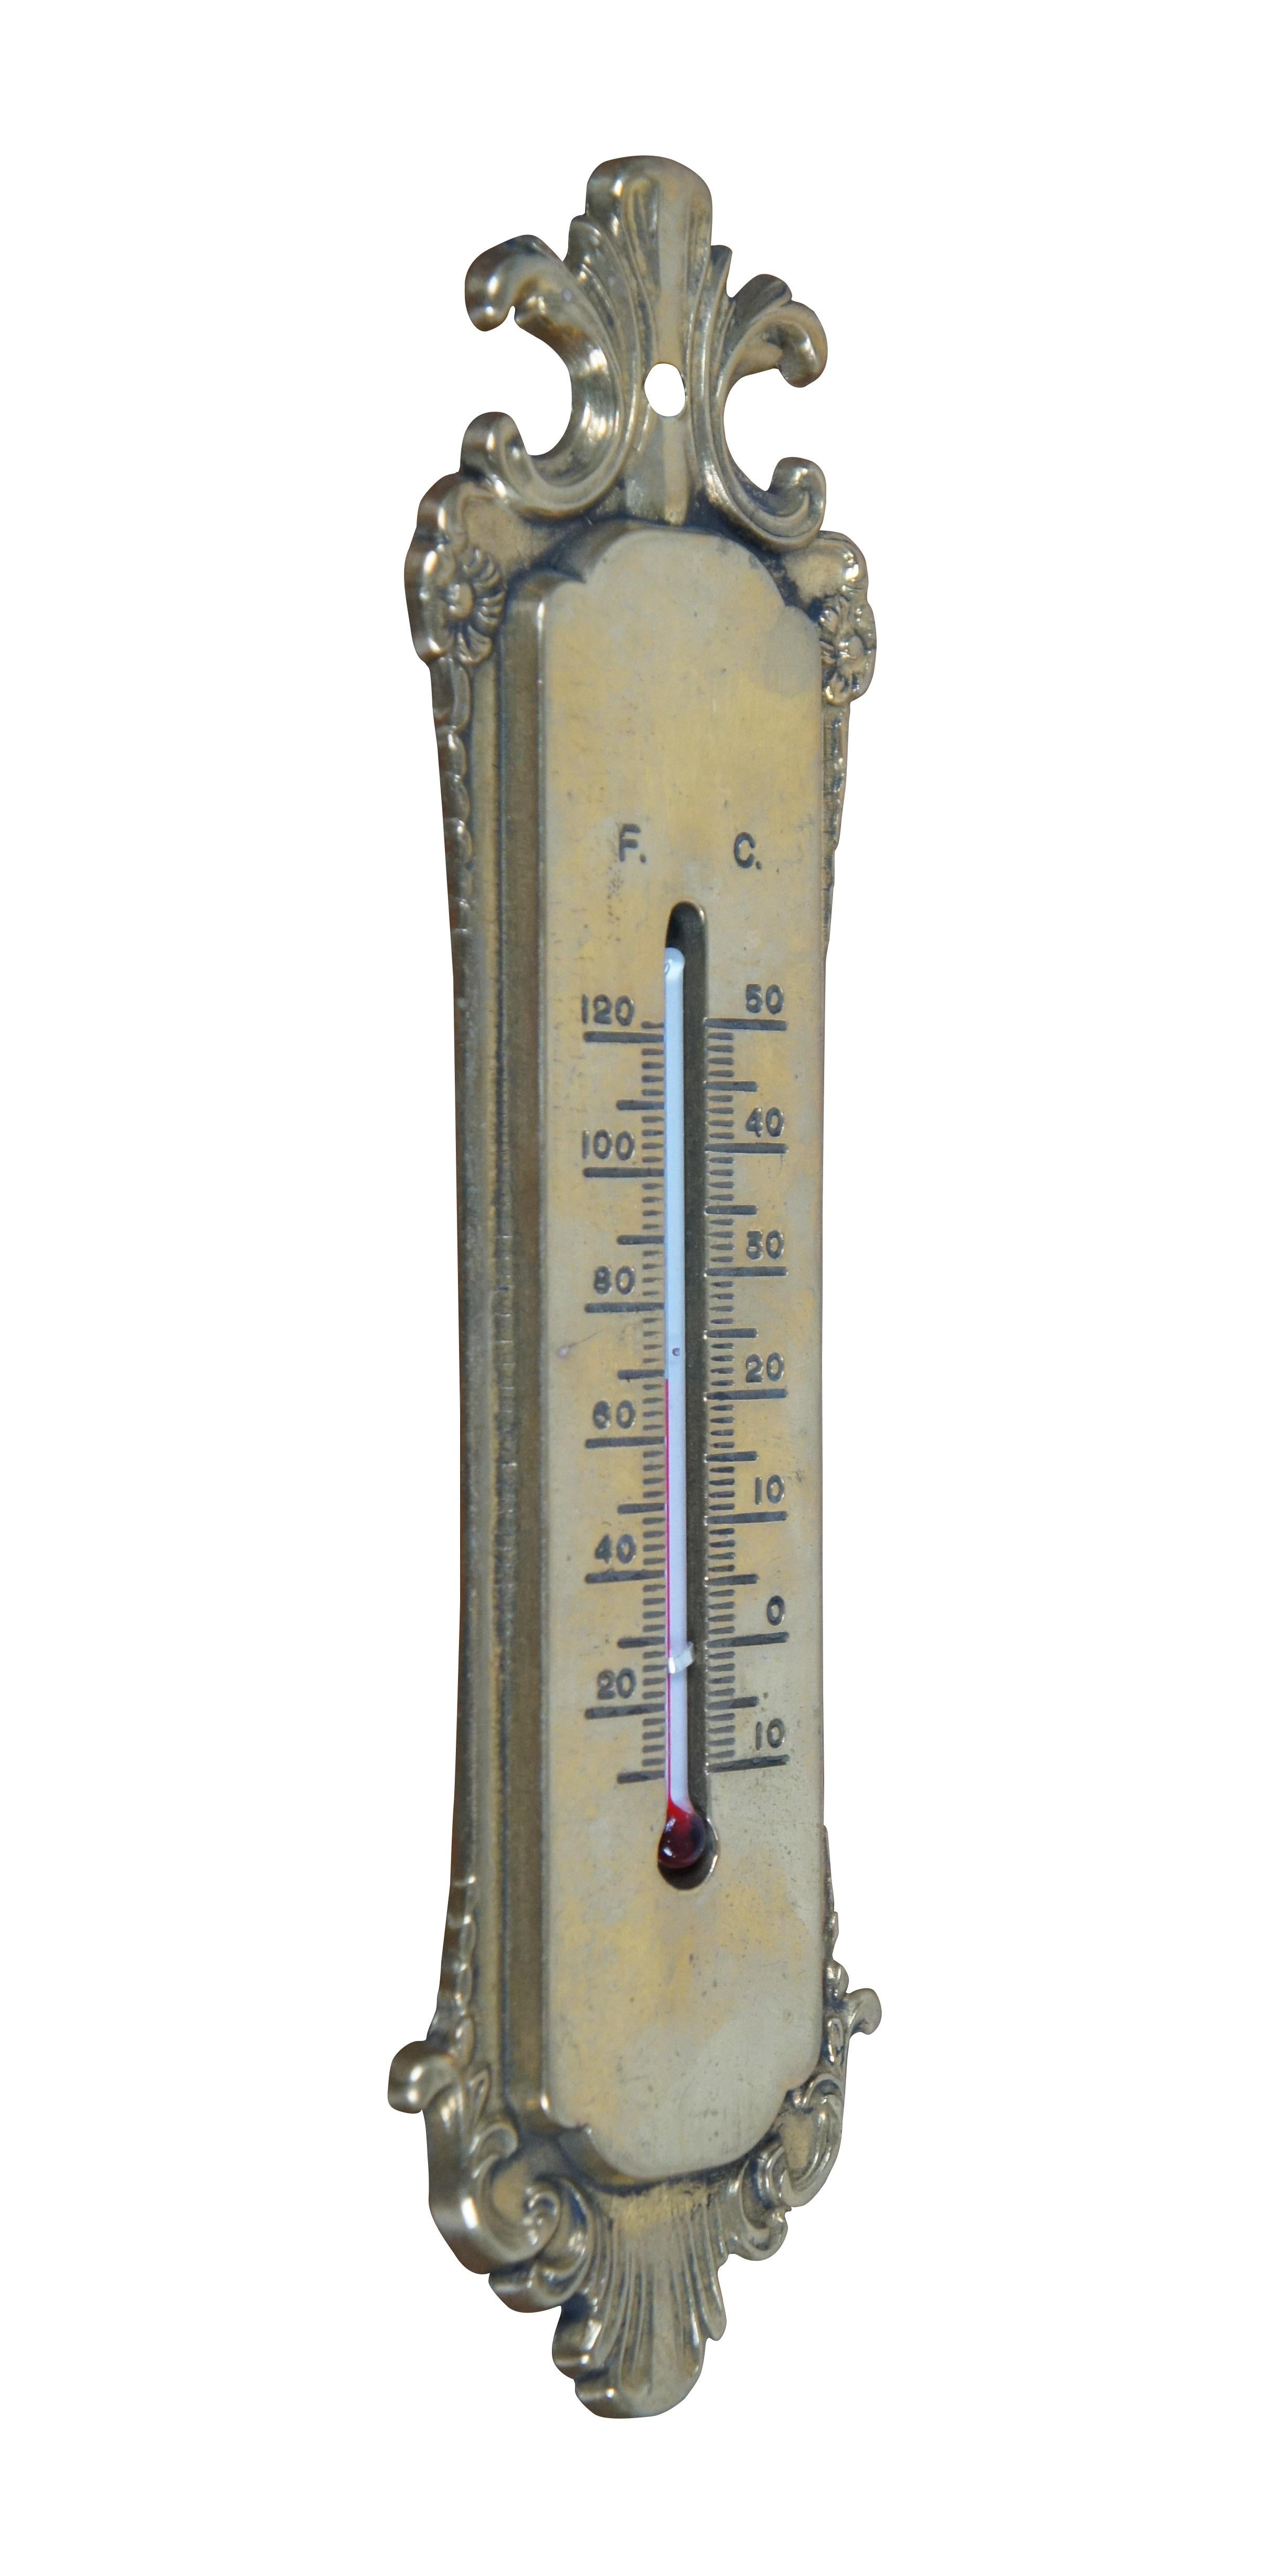 Late 19th century Victorian brass wall hanging thermometer. Simple art nouveau styling with scallops and flowers. Indicates temperatures up to 120 degrees Fahrenheit and 50 degrees Celsius with standard red-dyed alcohol filled glass